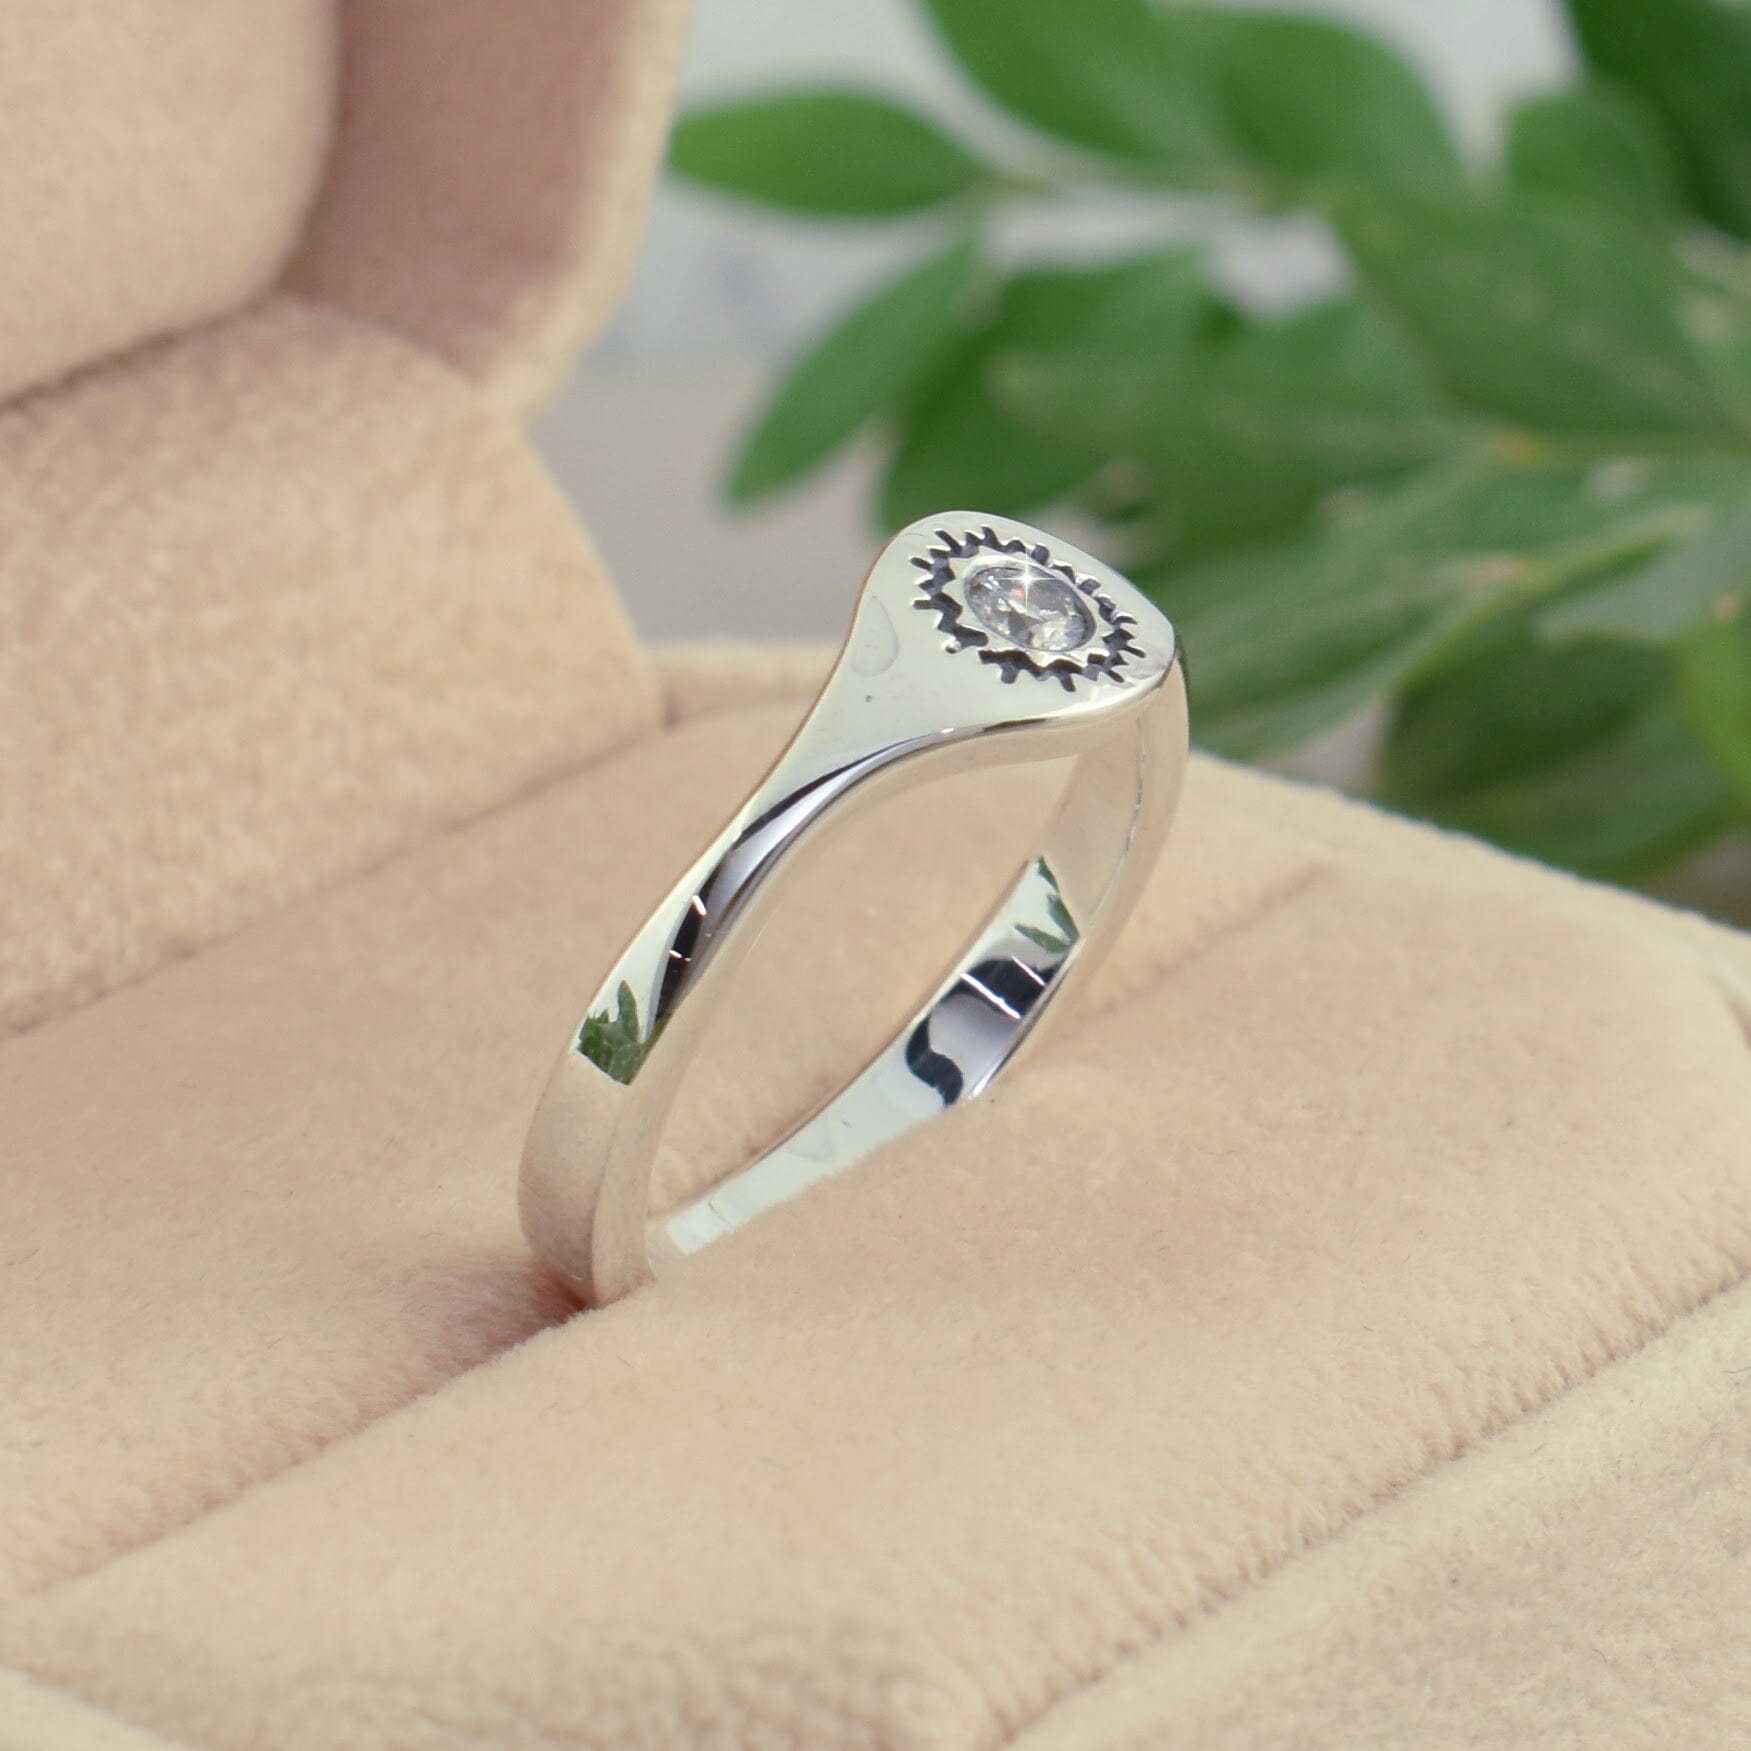 sterling silver ring with a pattern around the diamond stone